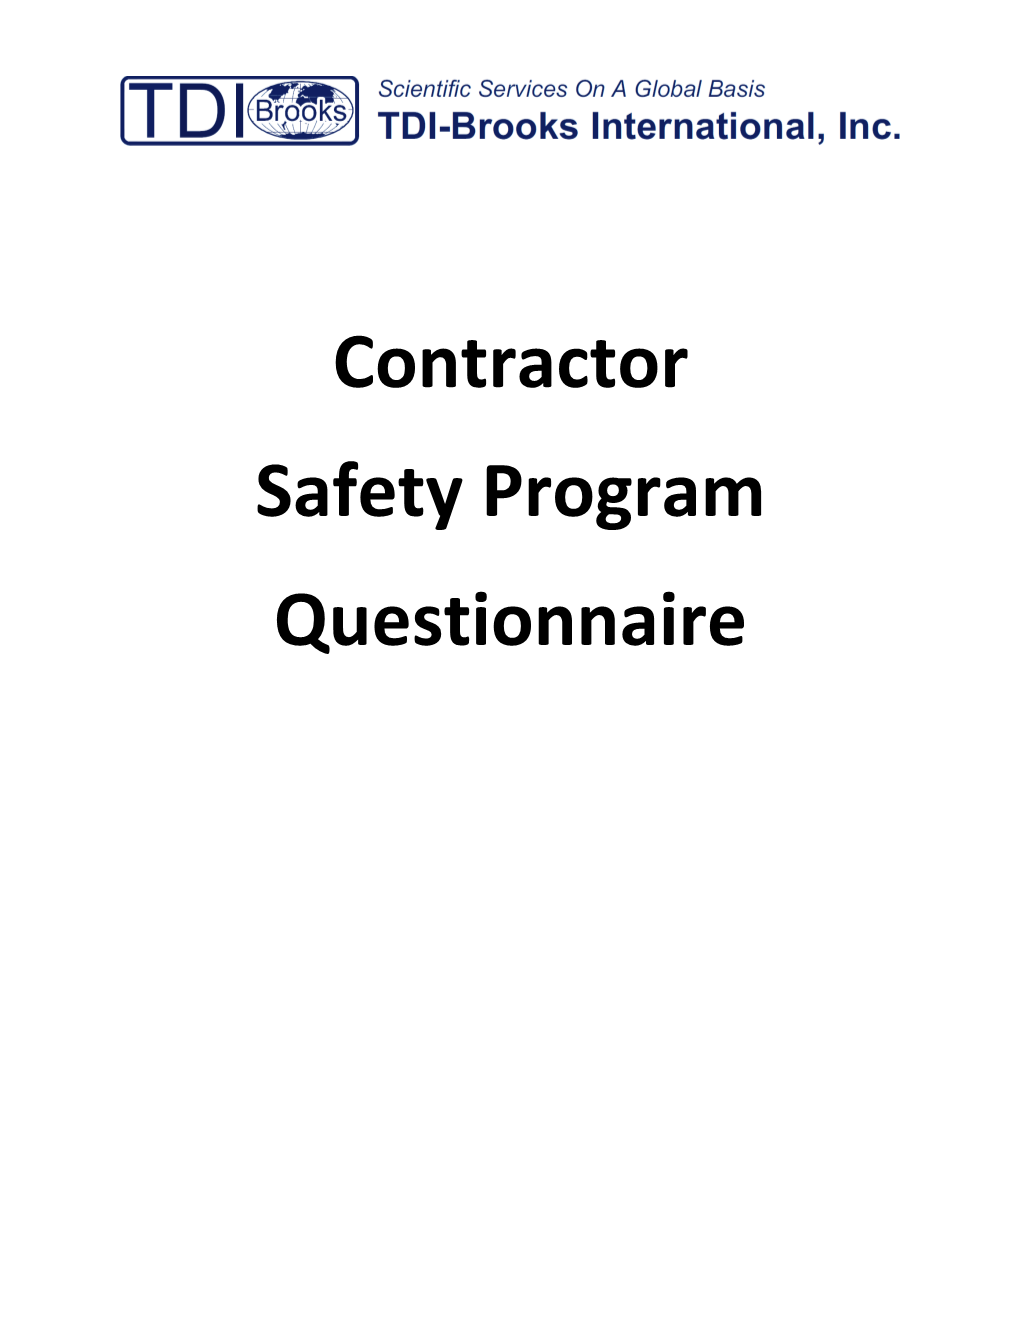 Complete the Contractor S Response Column and Provide Documents Where Applicable